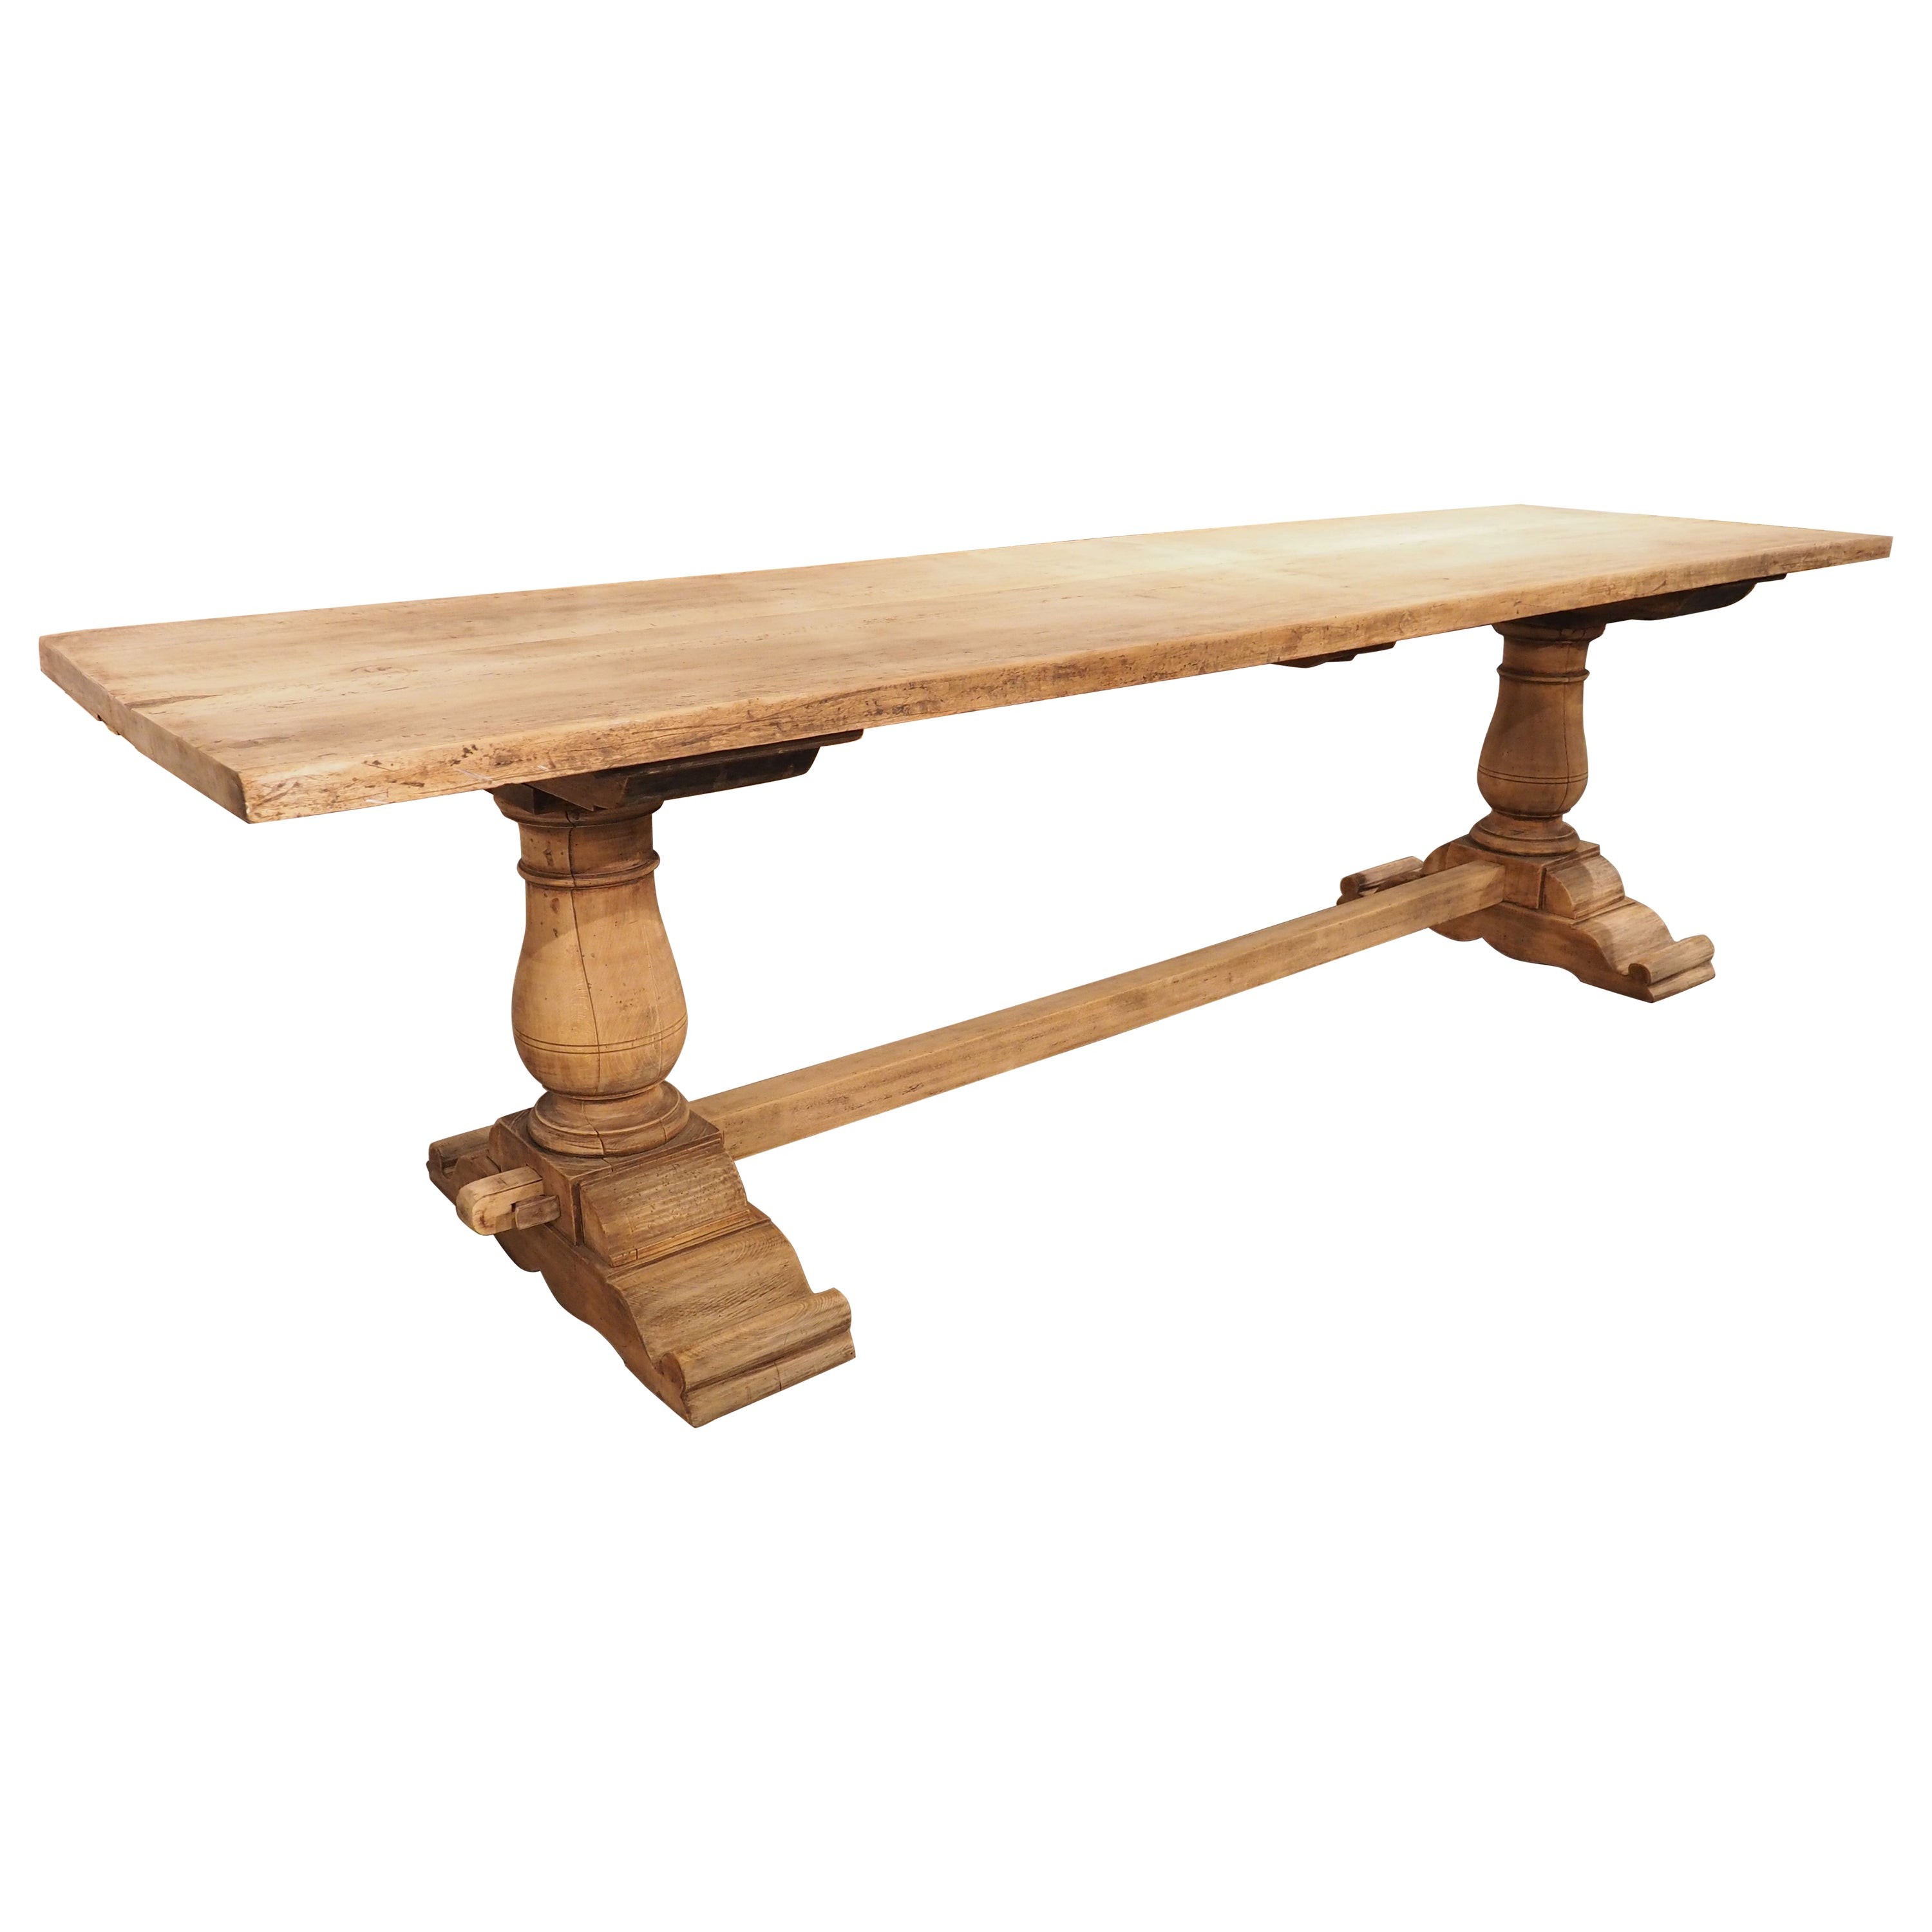 Antique Tuscan Walnut and Oak Dining Table, Circa 1900